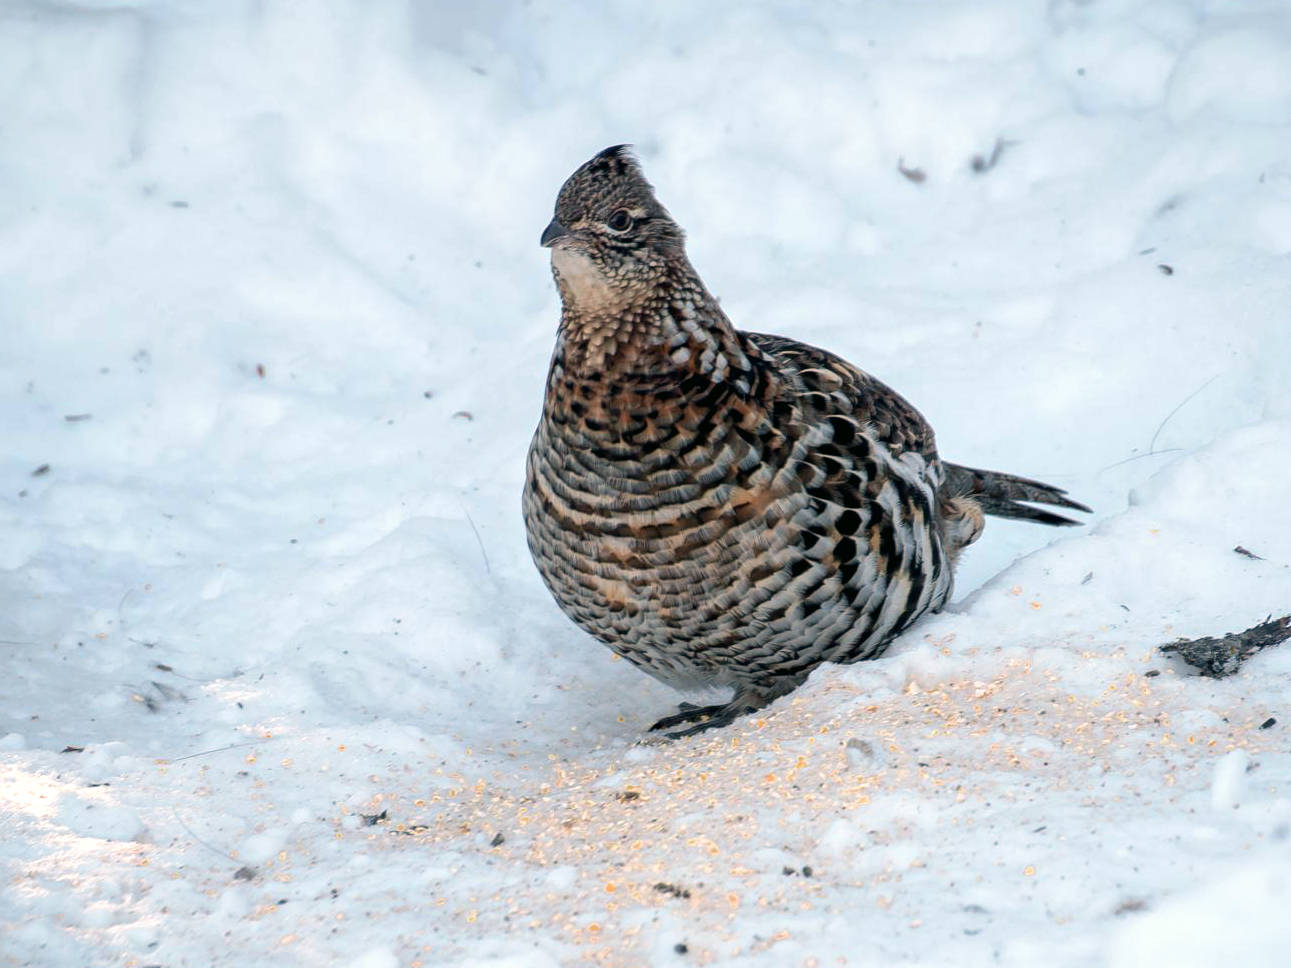 A ruffed grouse male advertises his territory and attracts females by standing with the tail braced on a log or small mound. He ‘drums’ by repeatedly cupping the wings forward and then quickly pulling them back. (Courtesy Photo / Wikimedia)                                A ruffed grouse male advertises his territory and attracts females by standing with the tail braced on a log or small mound. He ‘drums’ by repeatedly cupping the wings forward and then quickly pulling them back. (Courtesy Photo / Wikimedia)